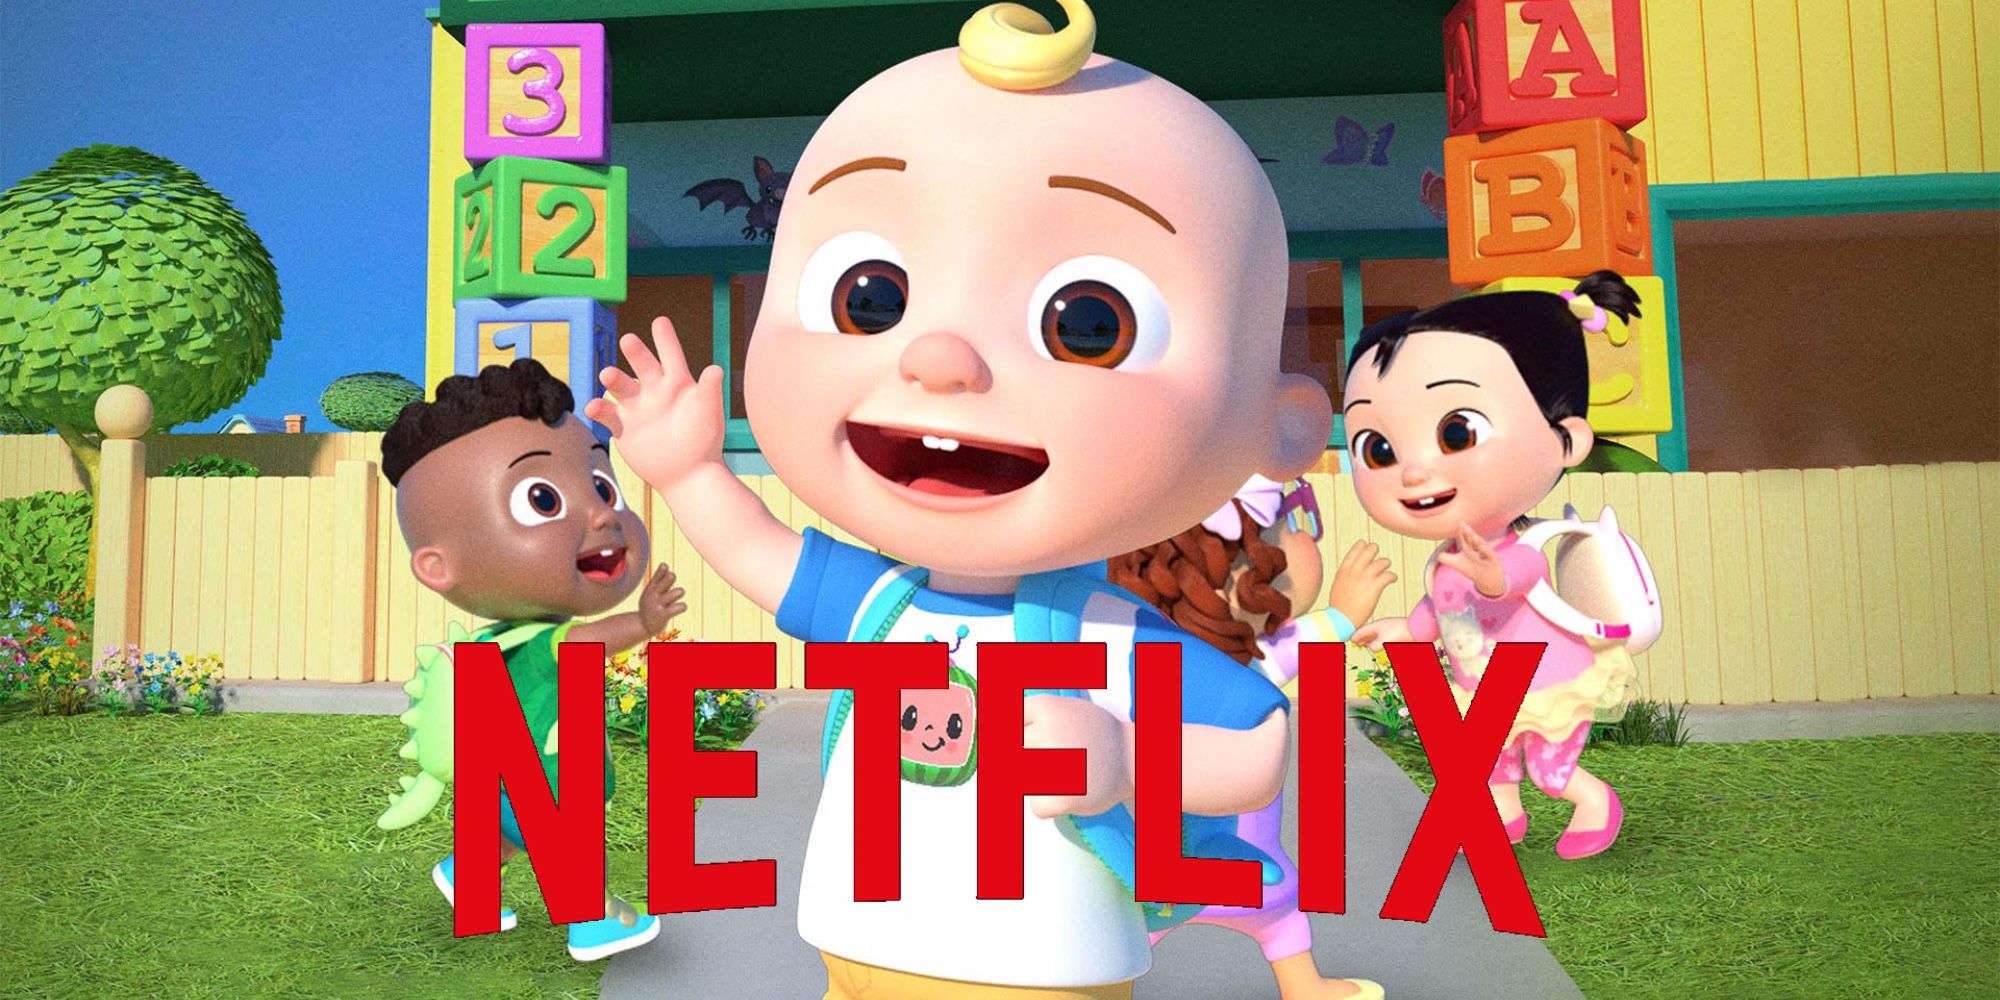 Netflixs Cocomelon Series Makes Its Animation Purge Even Worse